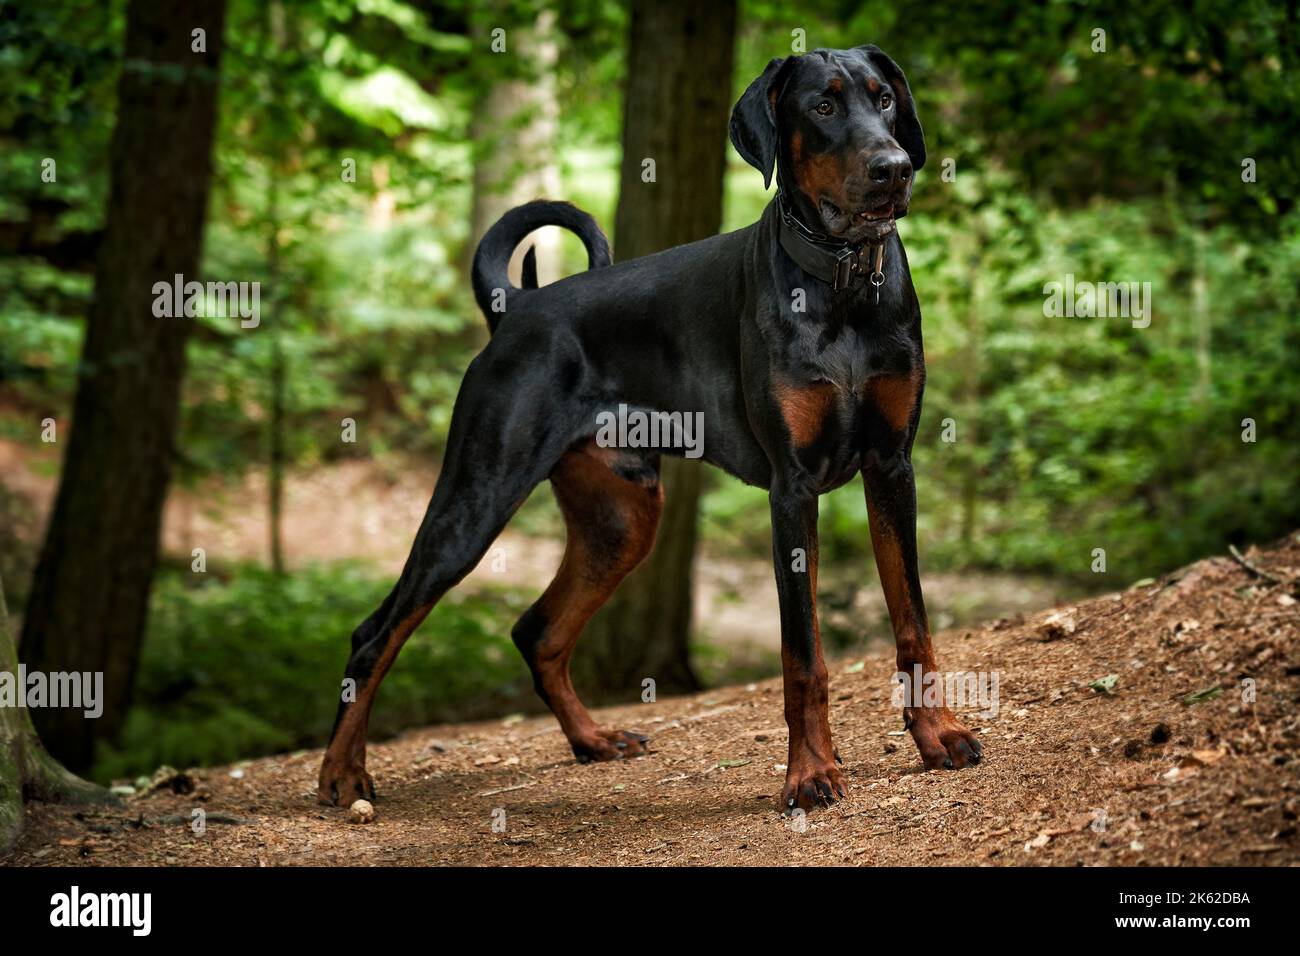 Doberman puppy dog standing alert in woods while on a walk Stock Photo